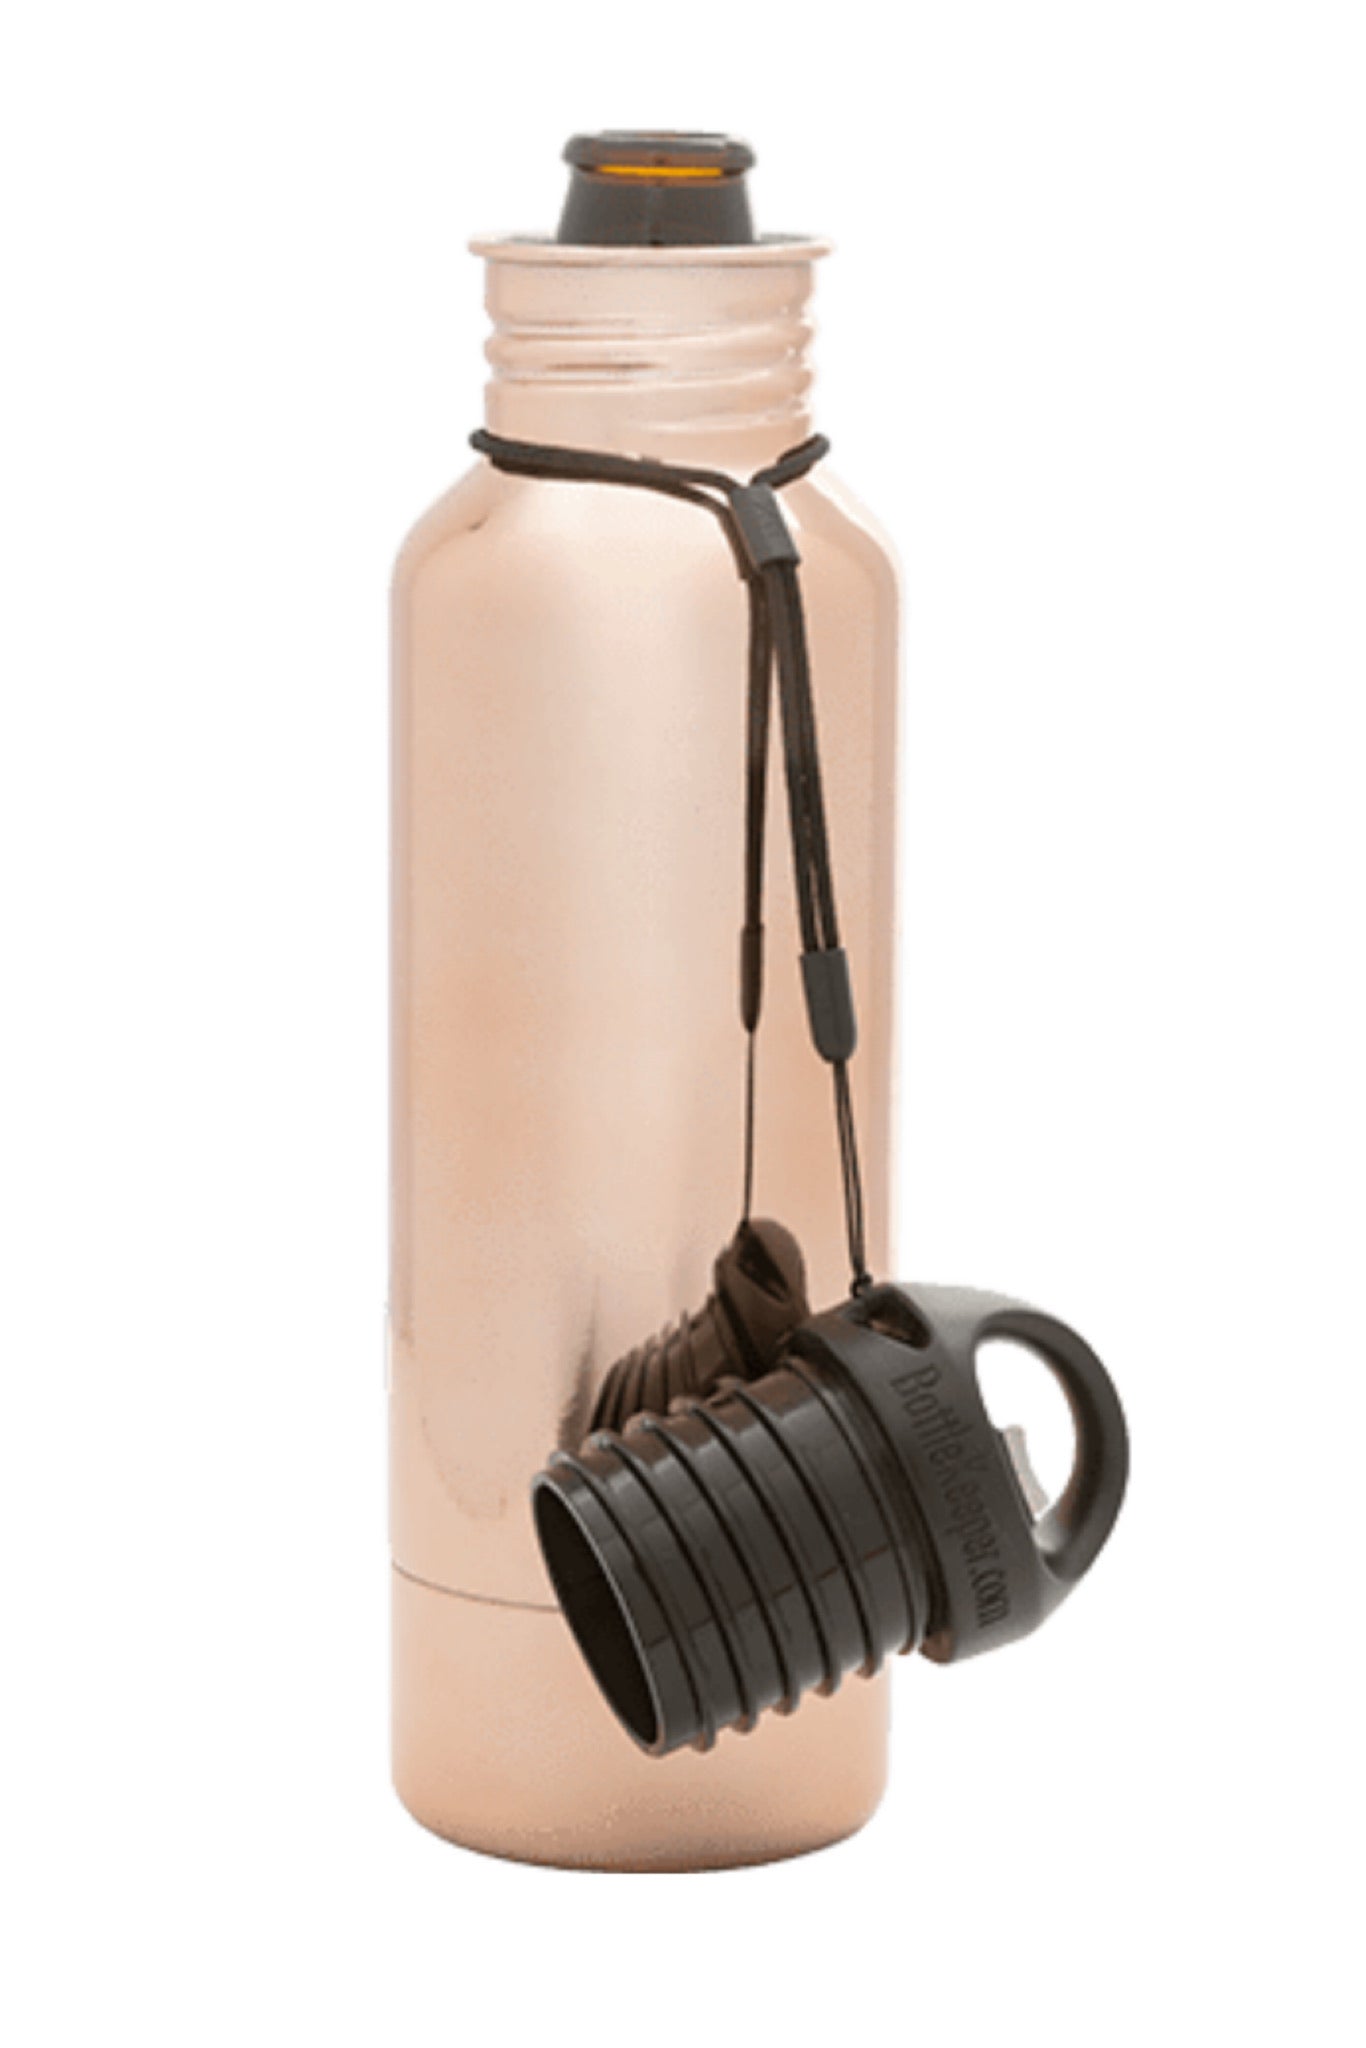  BottleKeeper - The Standard 2.0 - The Original Stainless Steel  Bottle Holder and Insulator to Keep Your Beer Colder (Black) : Home &  Kitchen